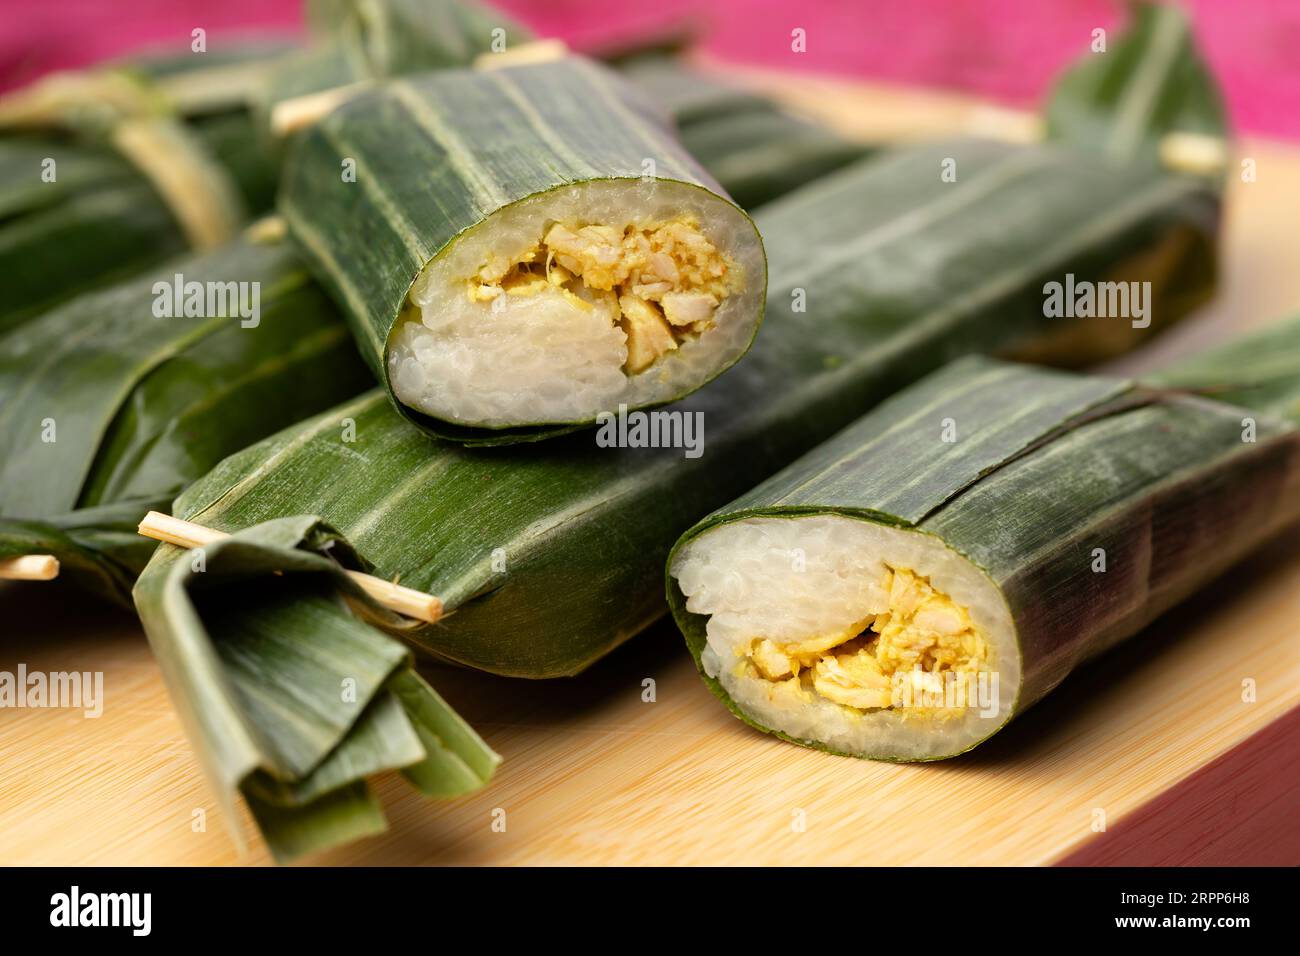 Whole and halved Lemper Ayam wrapped in banana leaves, an Indonesian savoury snack made of glutinous rice filled with seasoned shredded chicken close Stock Photo